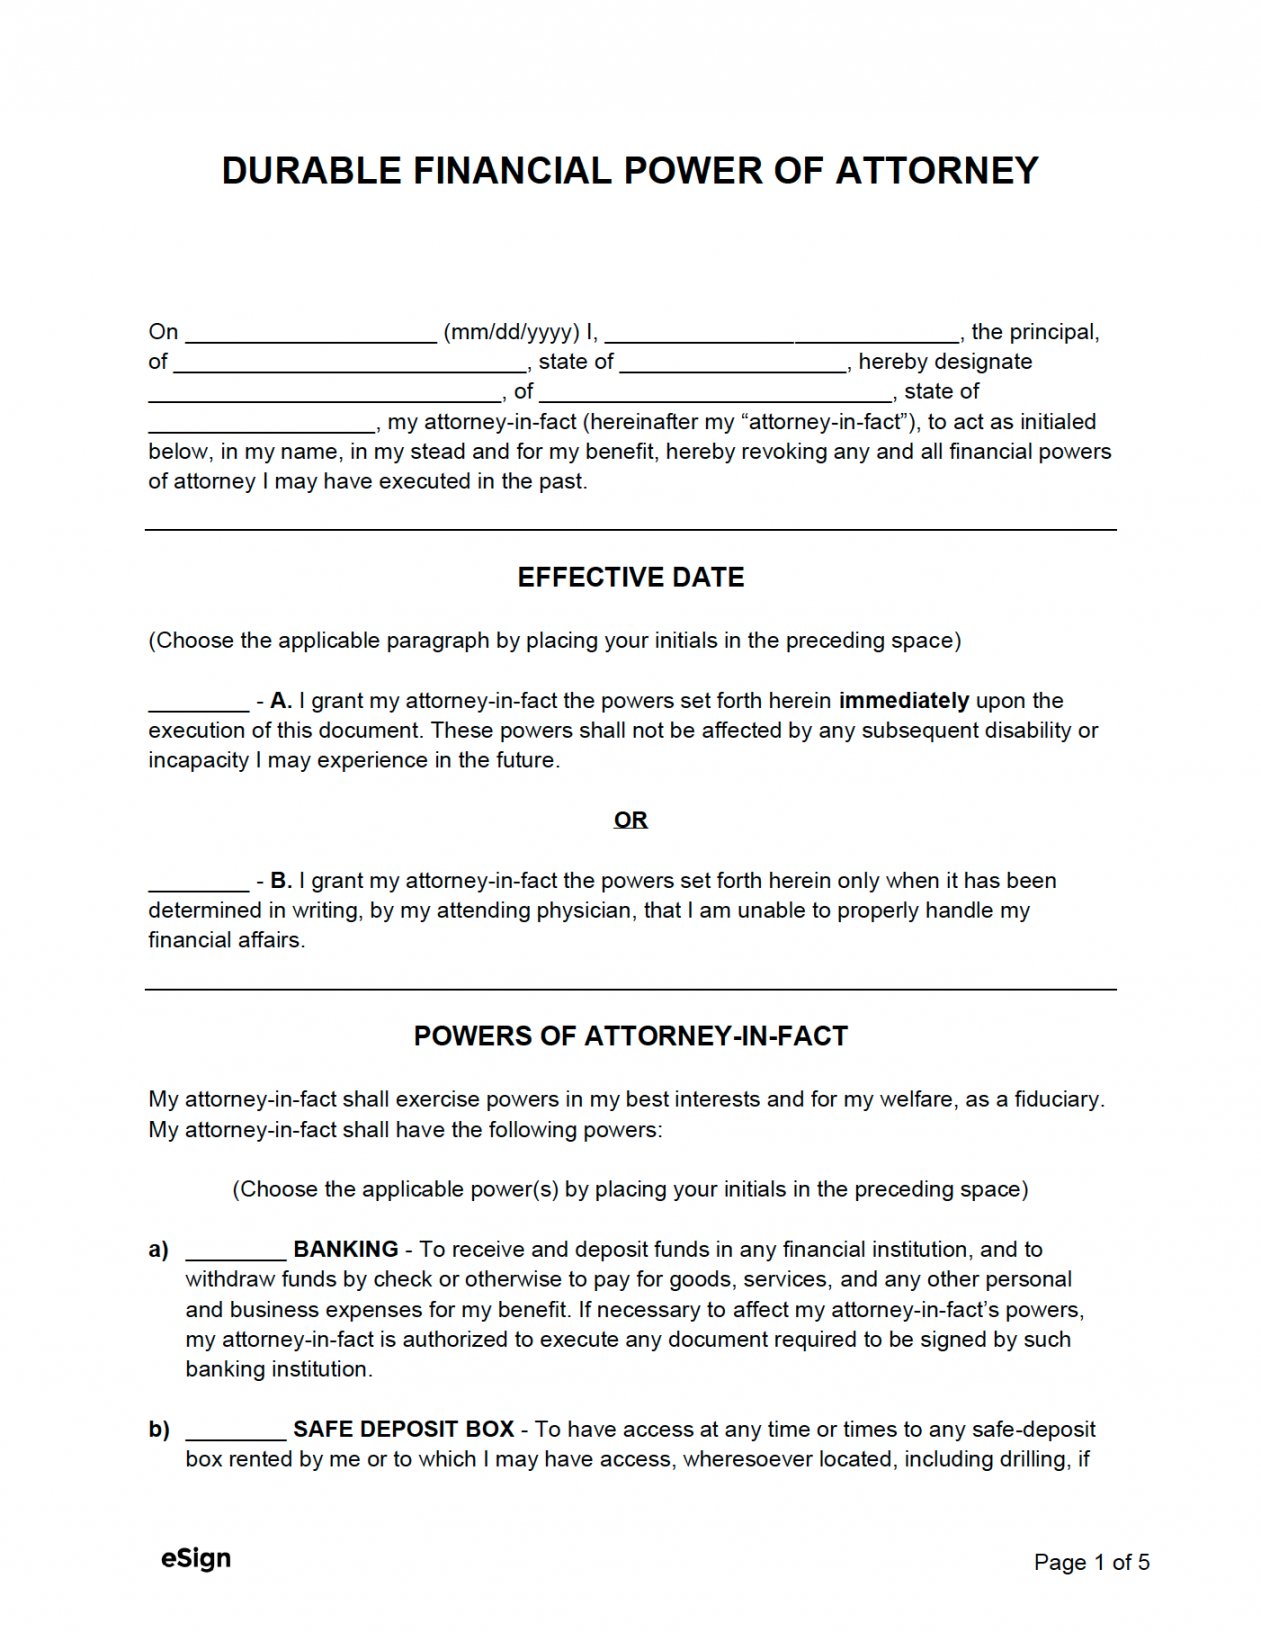 Free Durable Power of Attorney Forms  PDF  Word - FREE Printables - Free Printable Durable Power Of Attorney